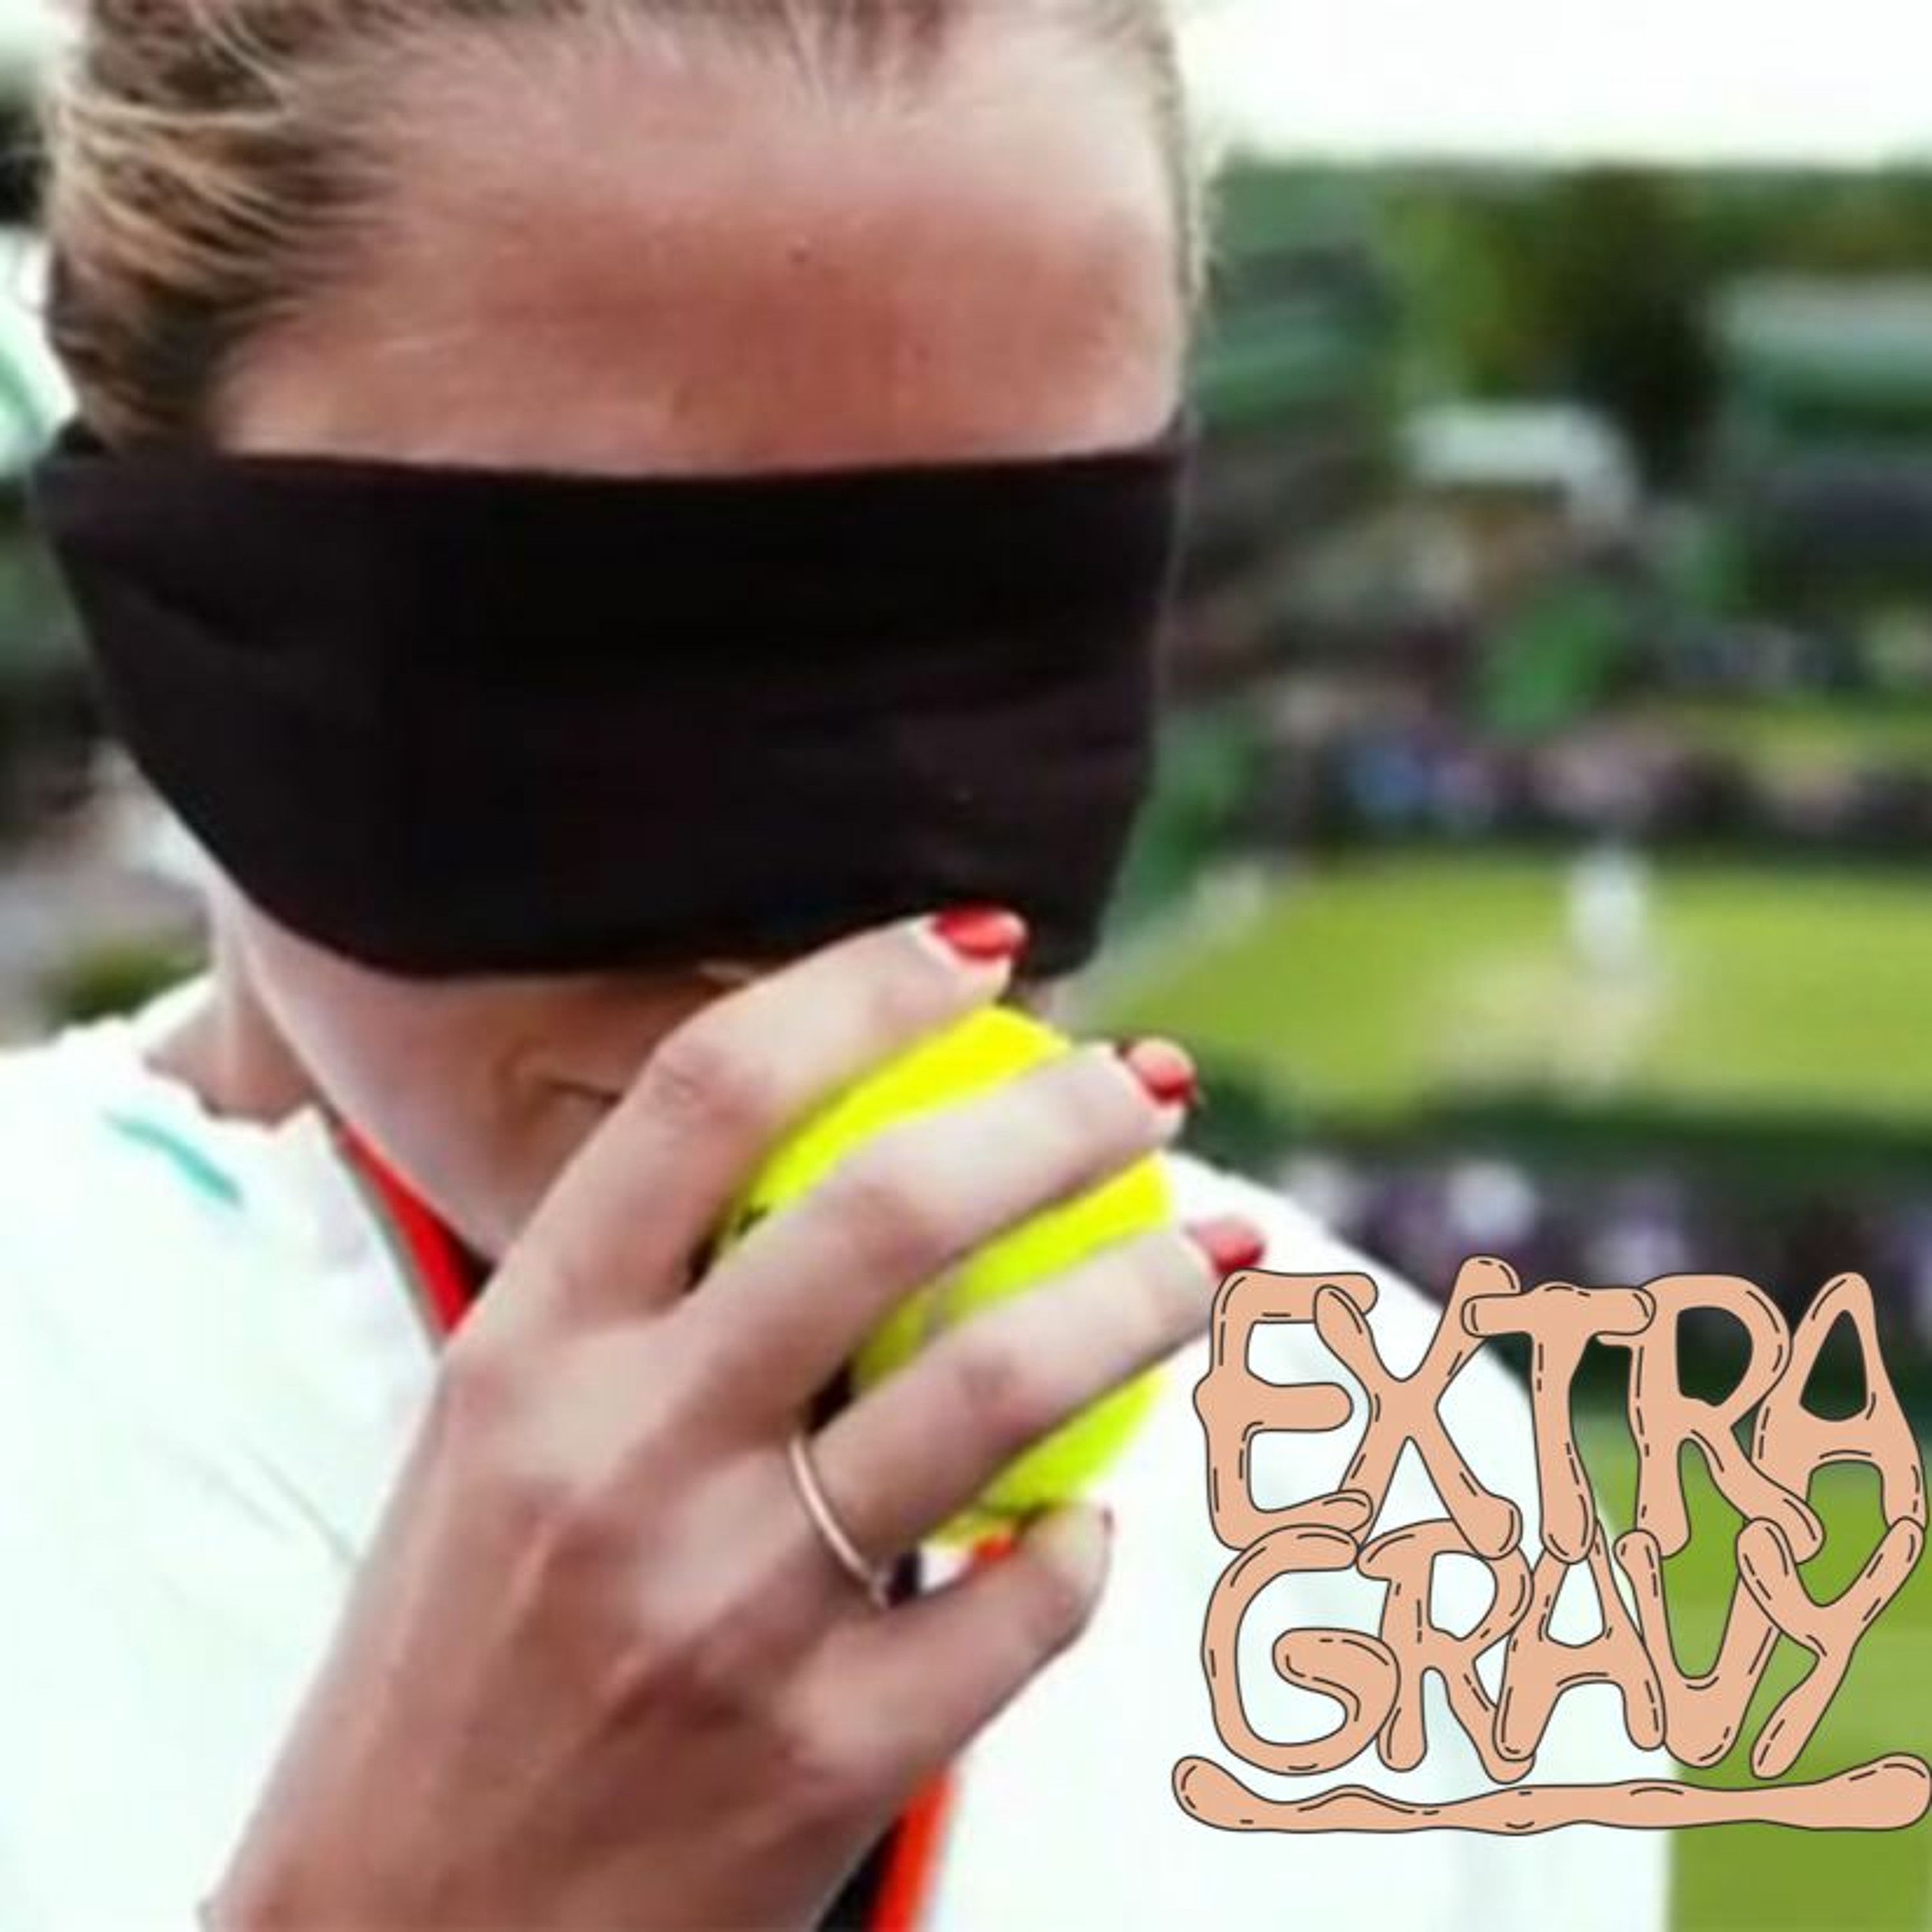 Thumbnail for "Blindfolded Tennis And Chill".